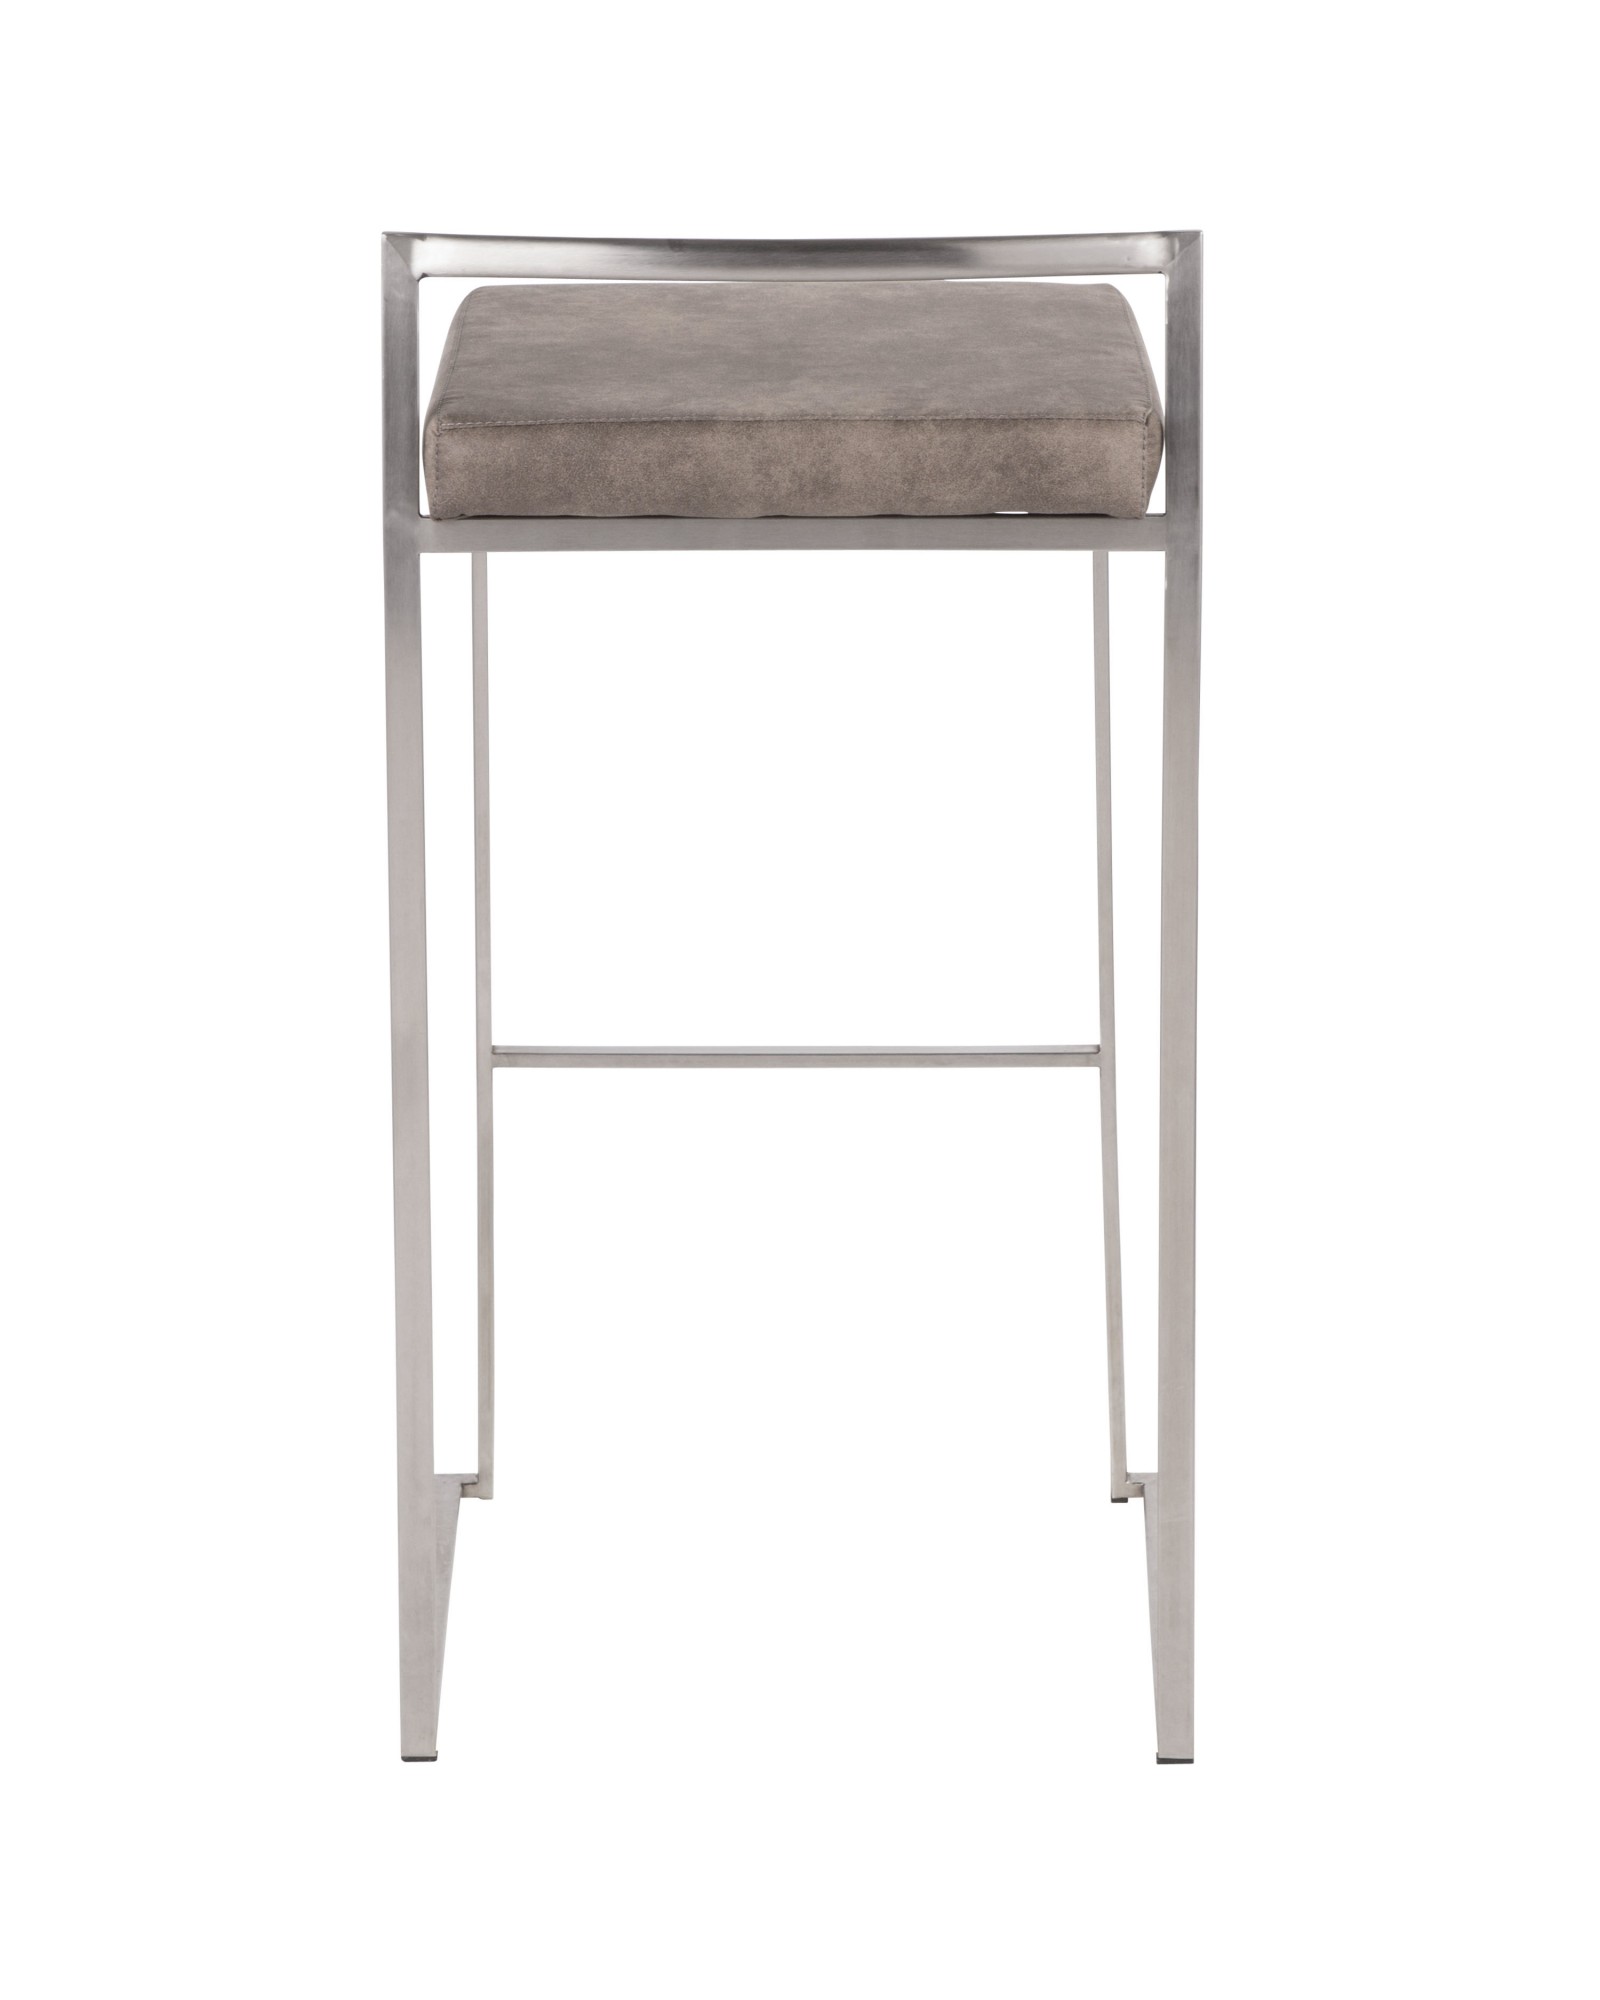 Fuji Contemporary Stackable Barstool in Stainless Steel with Stone Cowboy Fabric Cushion - Set of 2